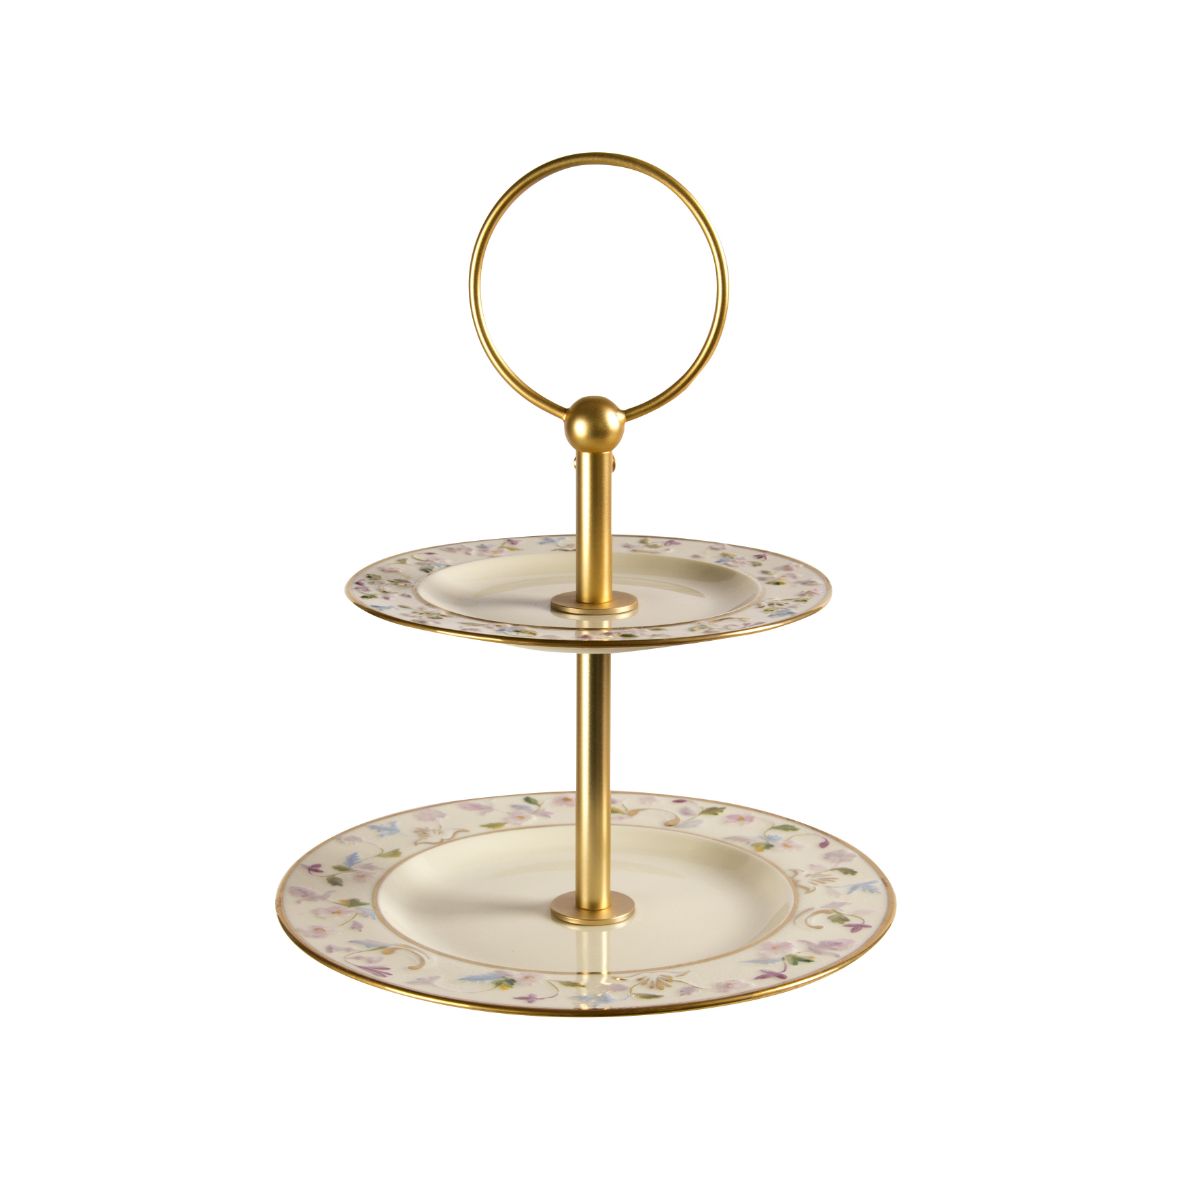 Taormina Multicolor &amp; Gold 2 Tier Cake Stand 